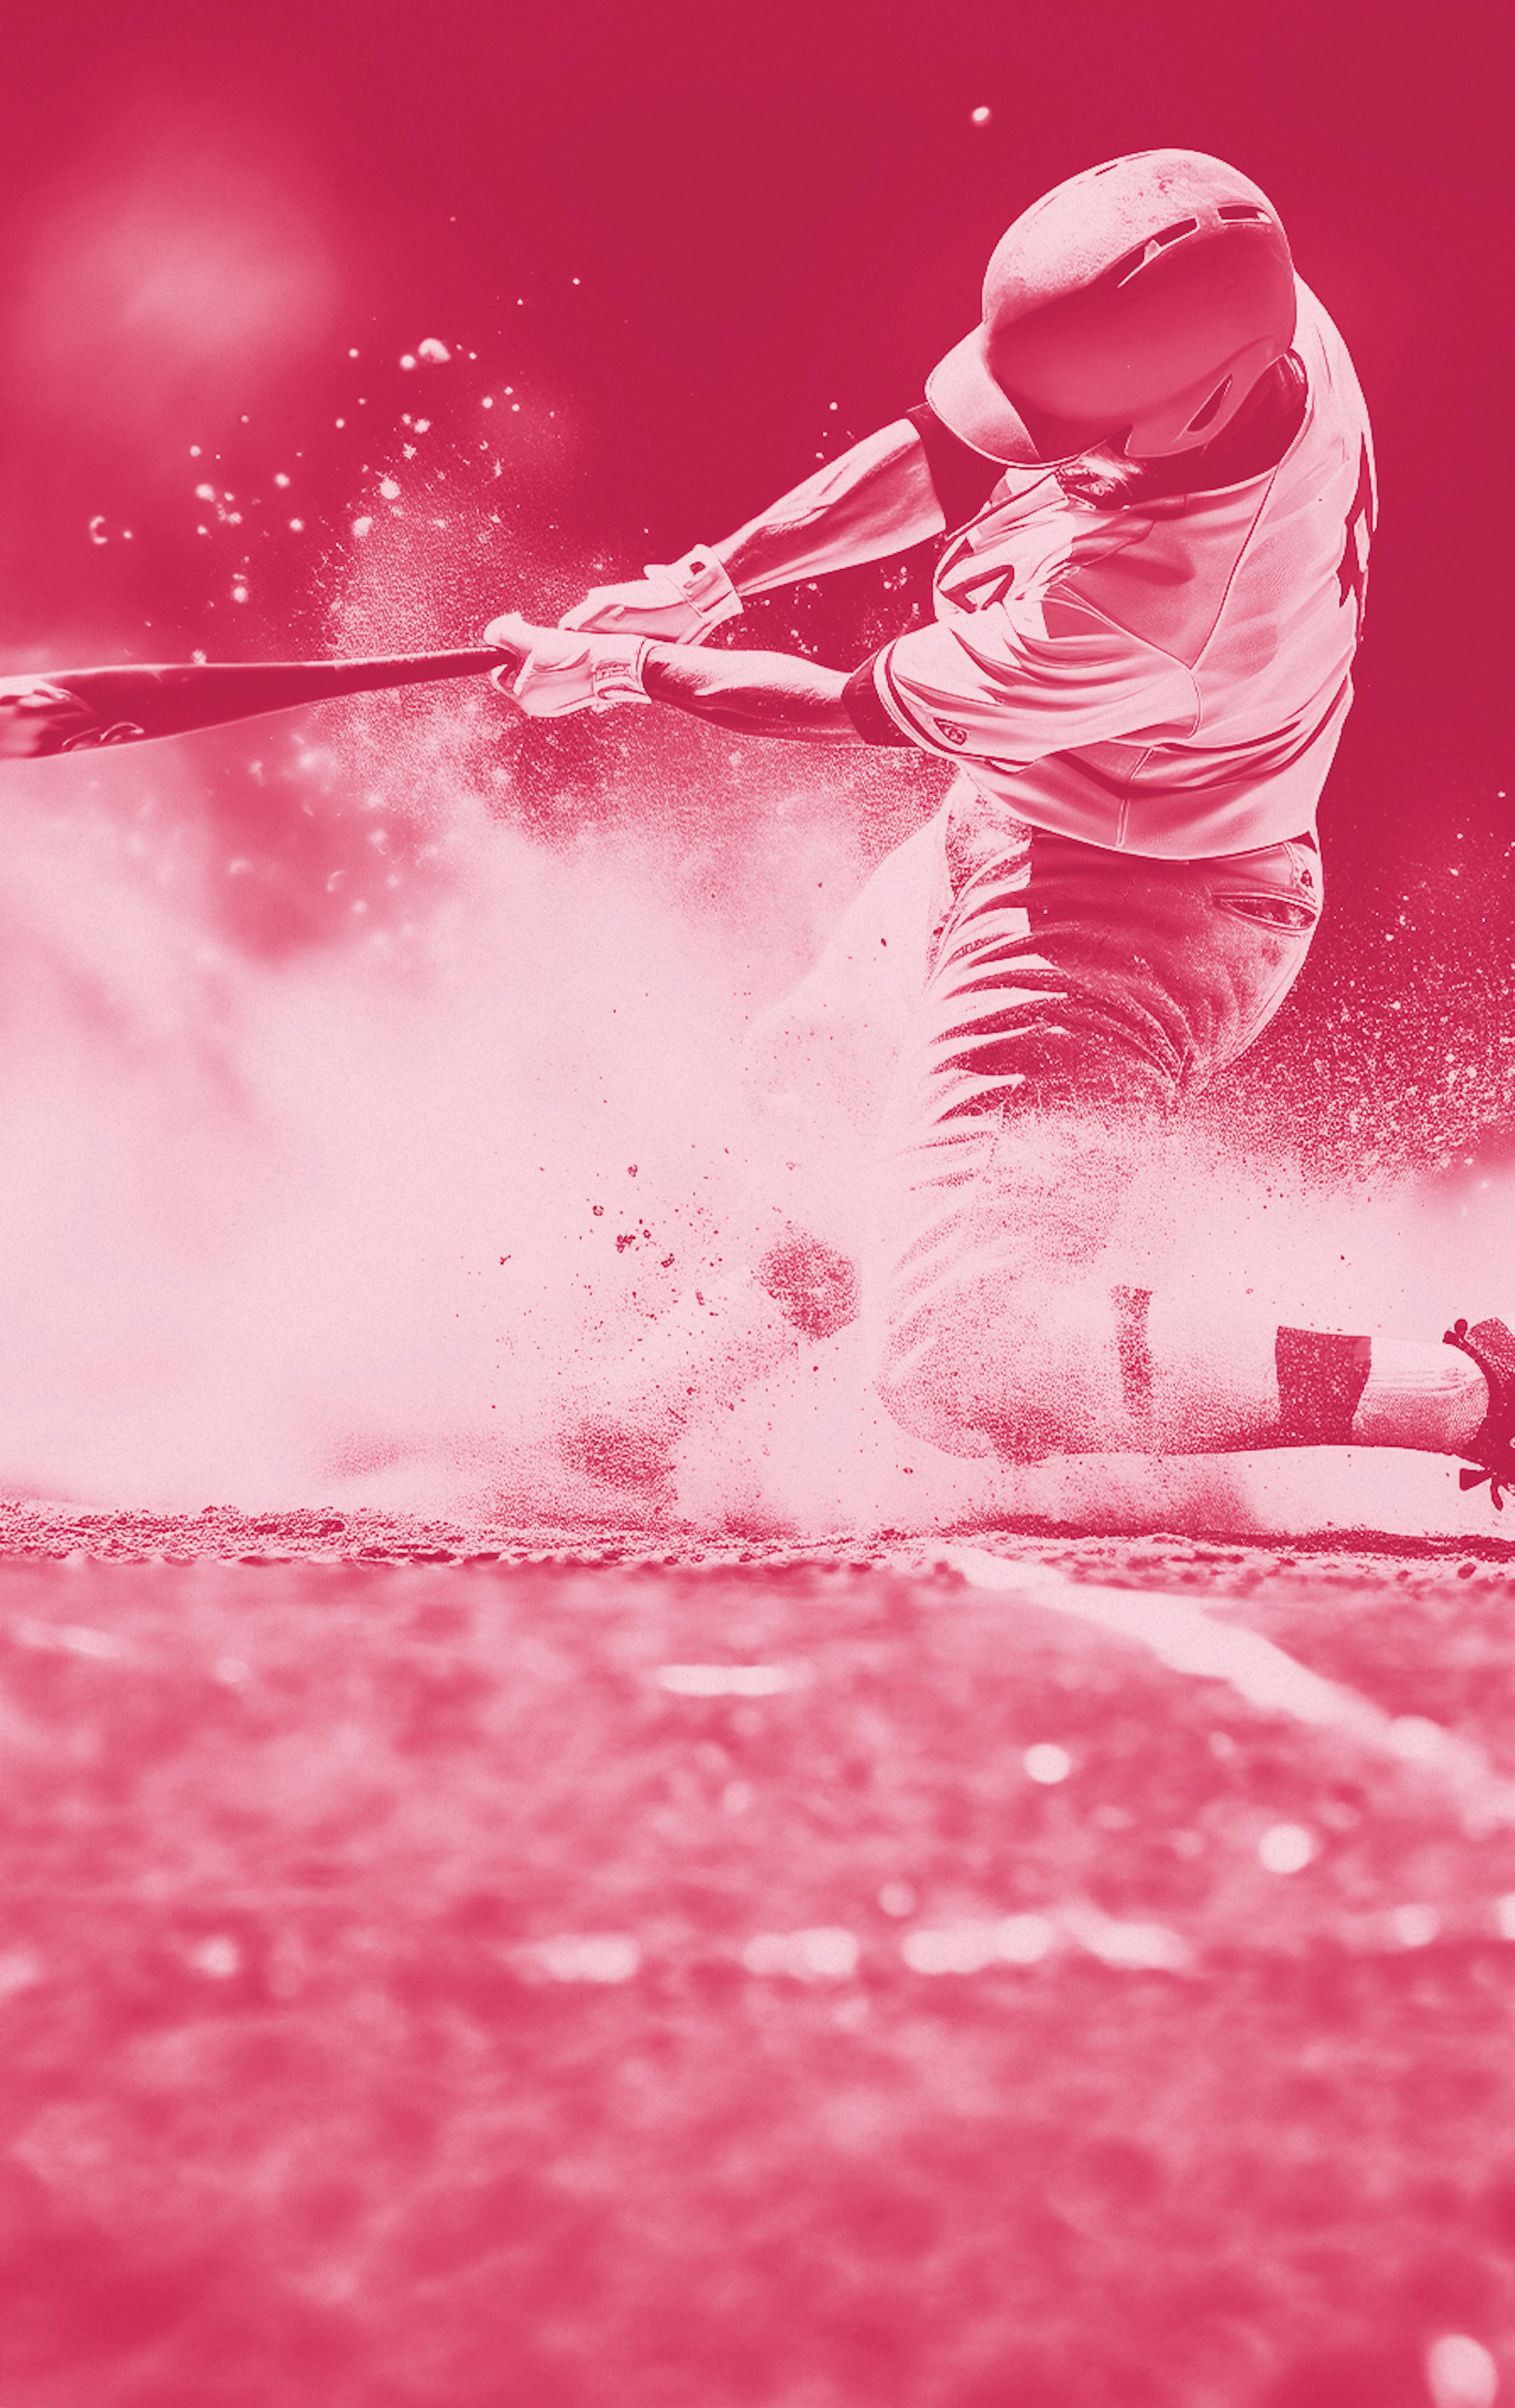 A baseball player swings at a pitch in a pink-hued photograph